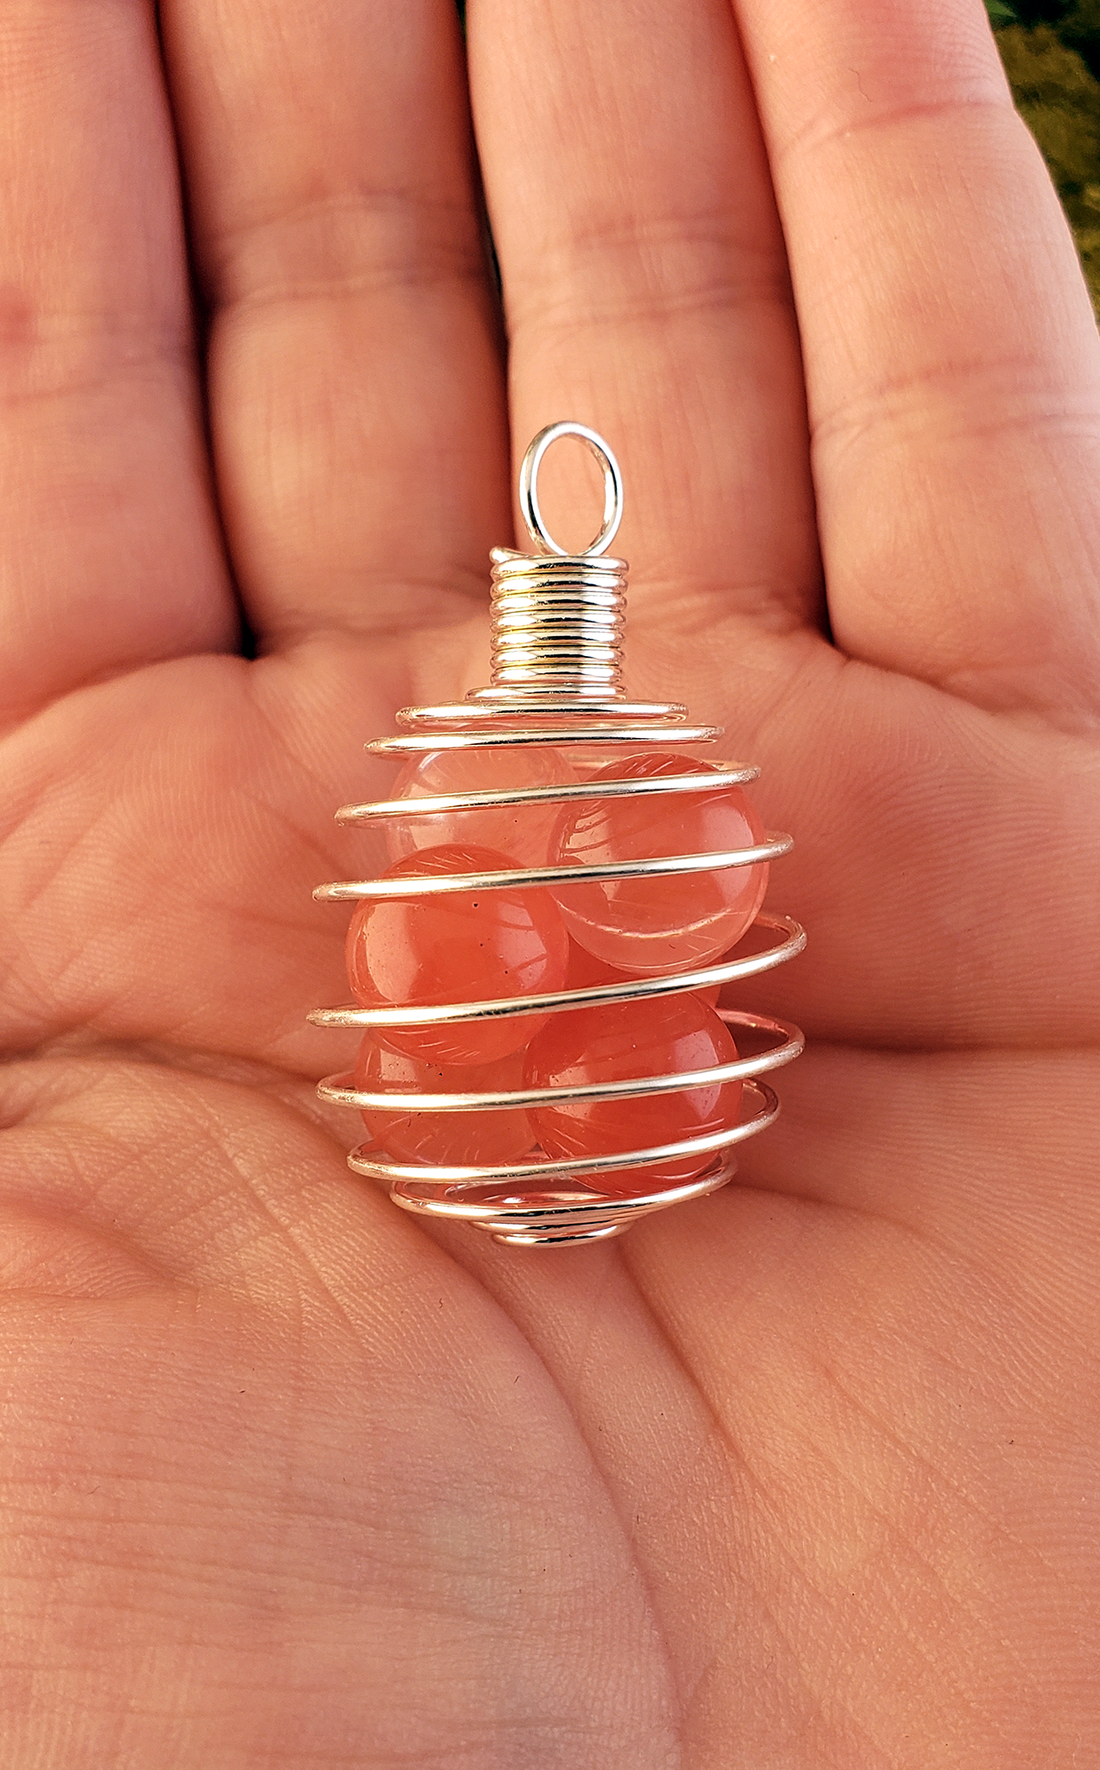 Empty Silver Plated Spiral Cage Pendant Necklace - 15mm 20mm or 25mm - Bulk Quantity 1 3 or 5 Tumble Stone Crystal Holder Gemstone Pendulum